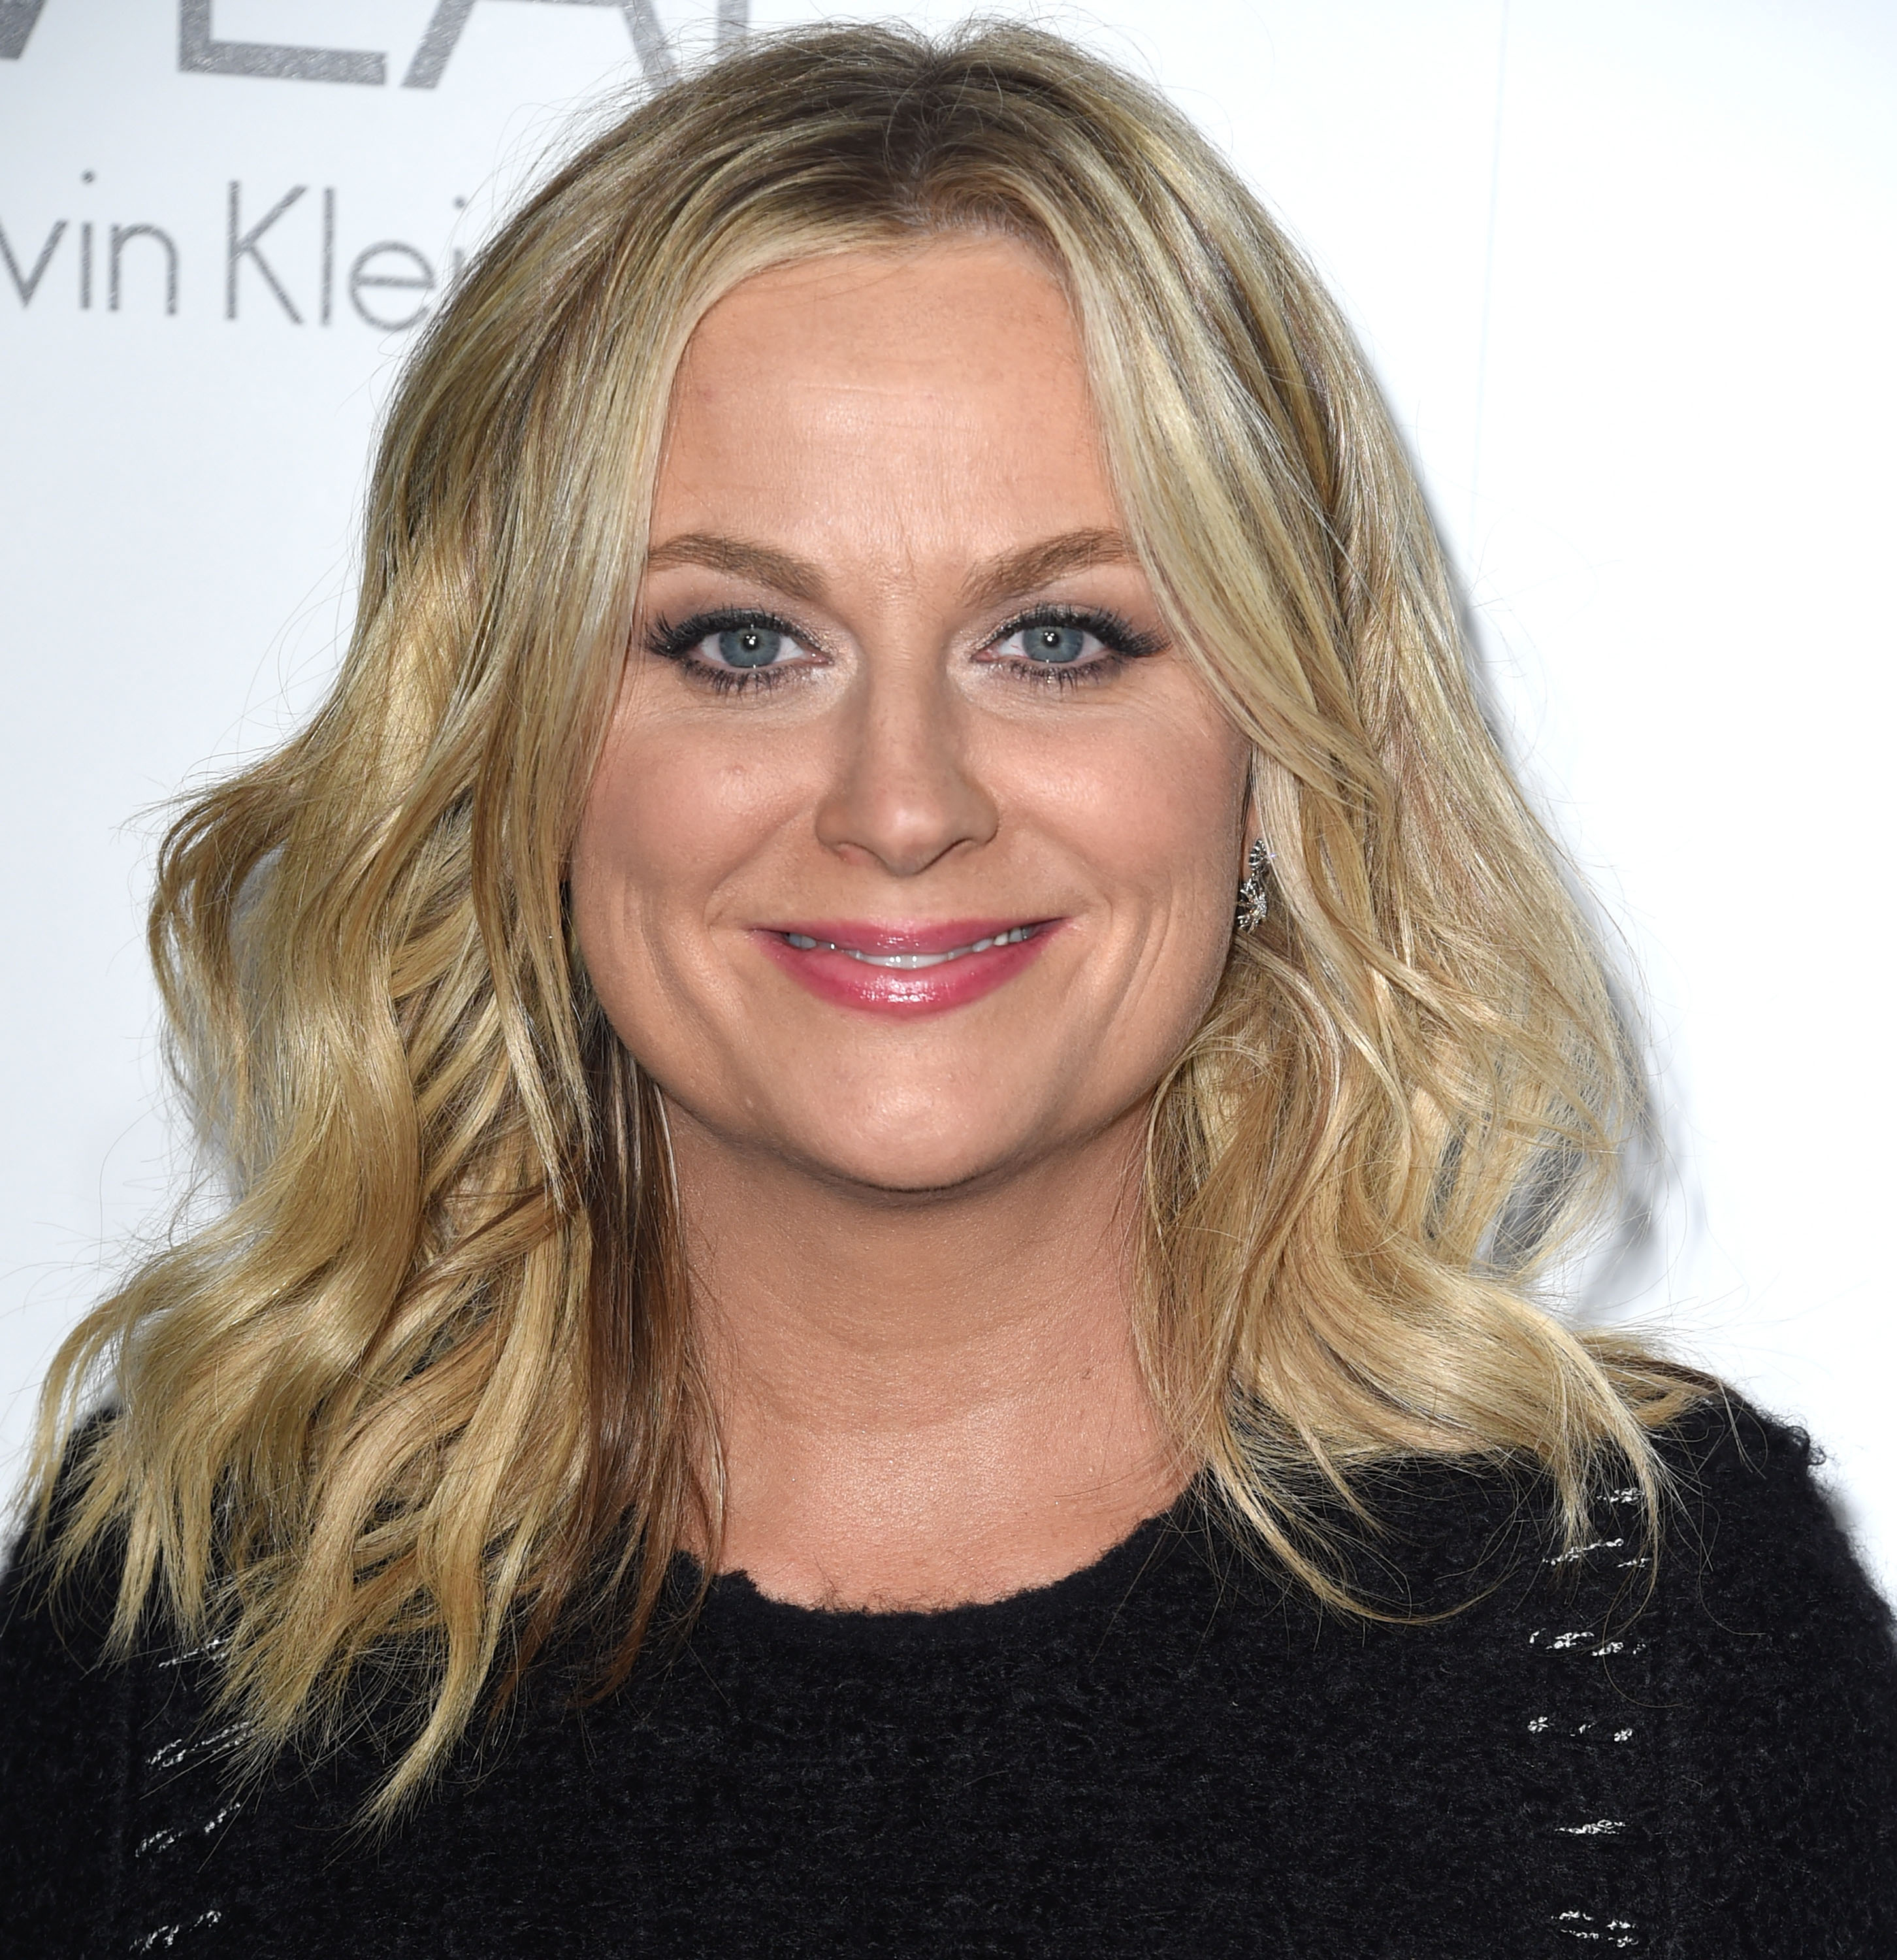 Amy Poehler arrives at the 2014 ELLE Women In Hollywood Awards at Four Seasons Hotel Los Angeles at Beverly Hills on Oct. 20, 2014 in Beverly Hills. (Steve Granitz&mdash;WireImage)